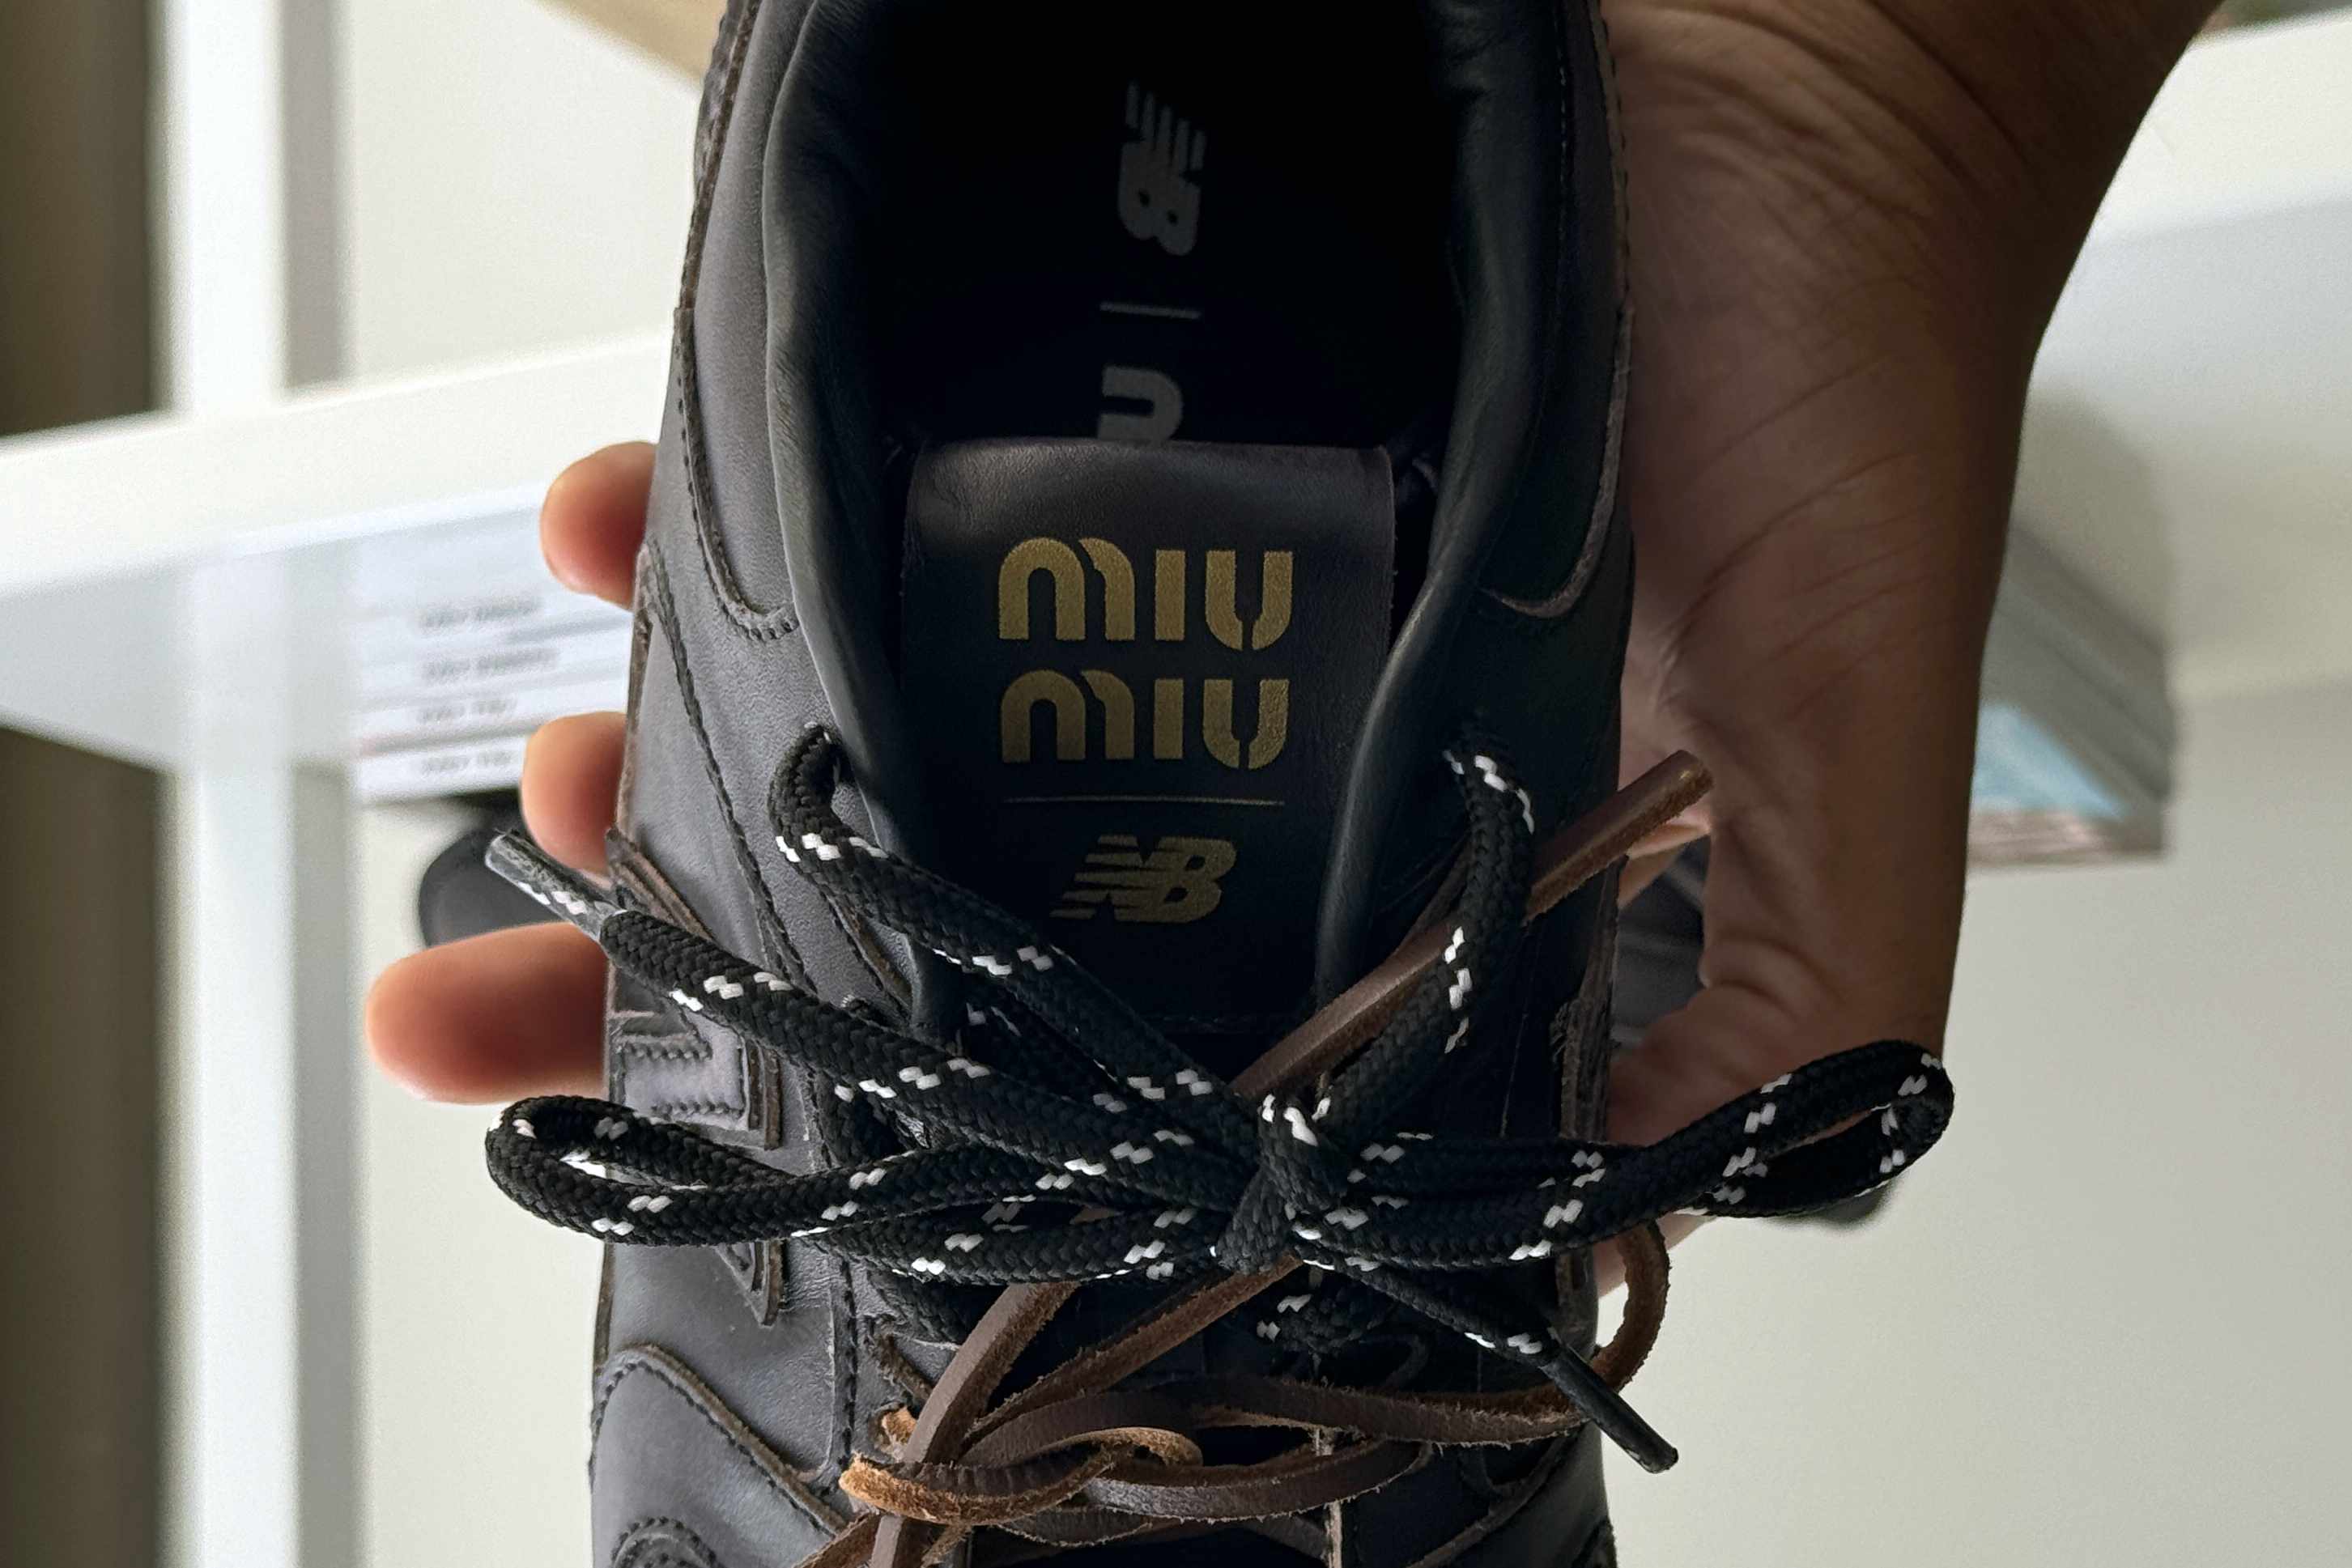 Miu Miu's New Balance 530 sneaker collab in black leather with two laces